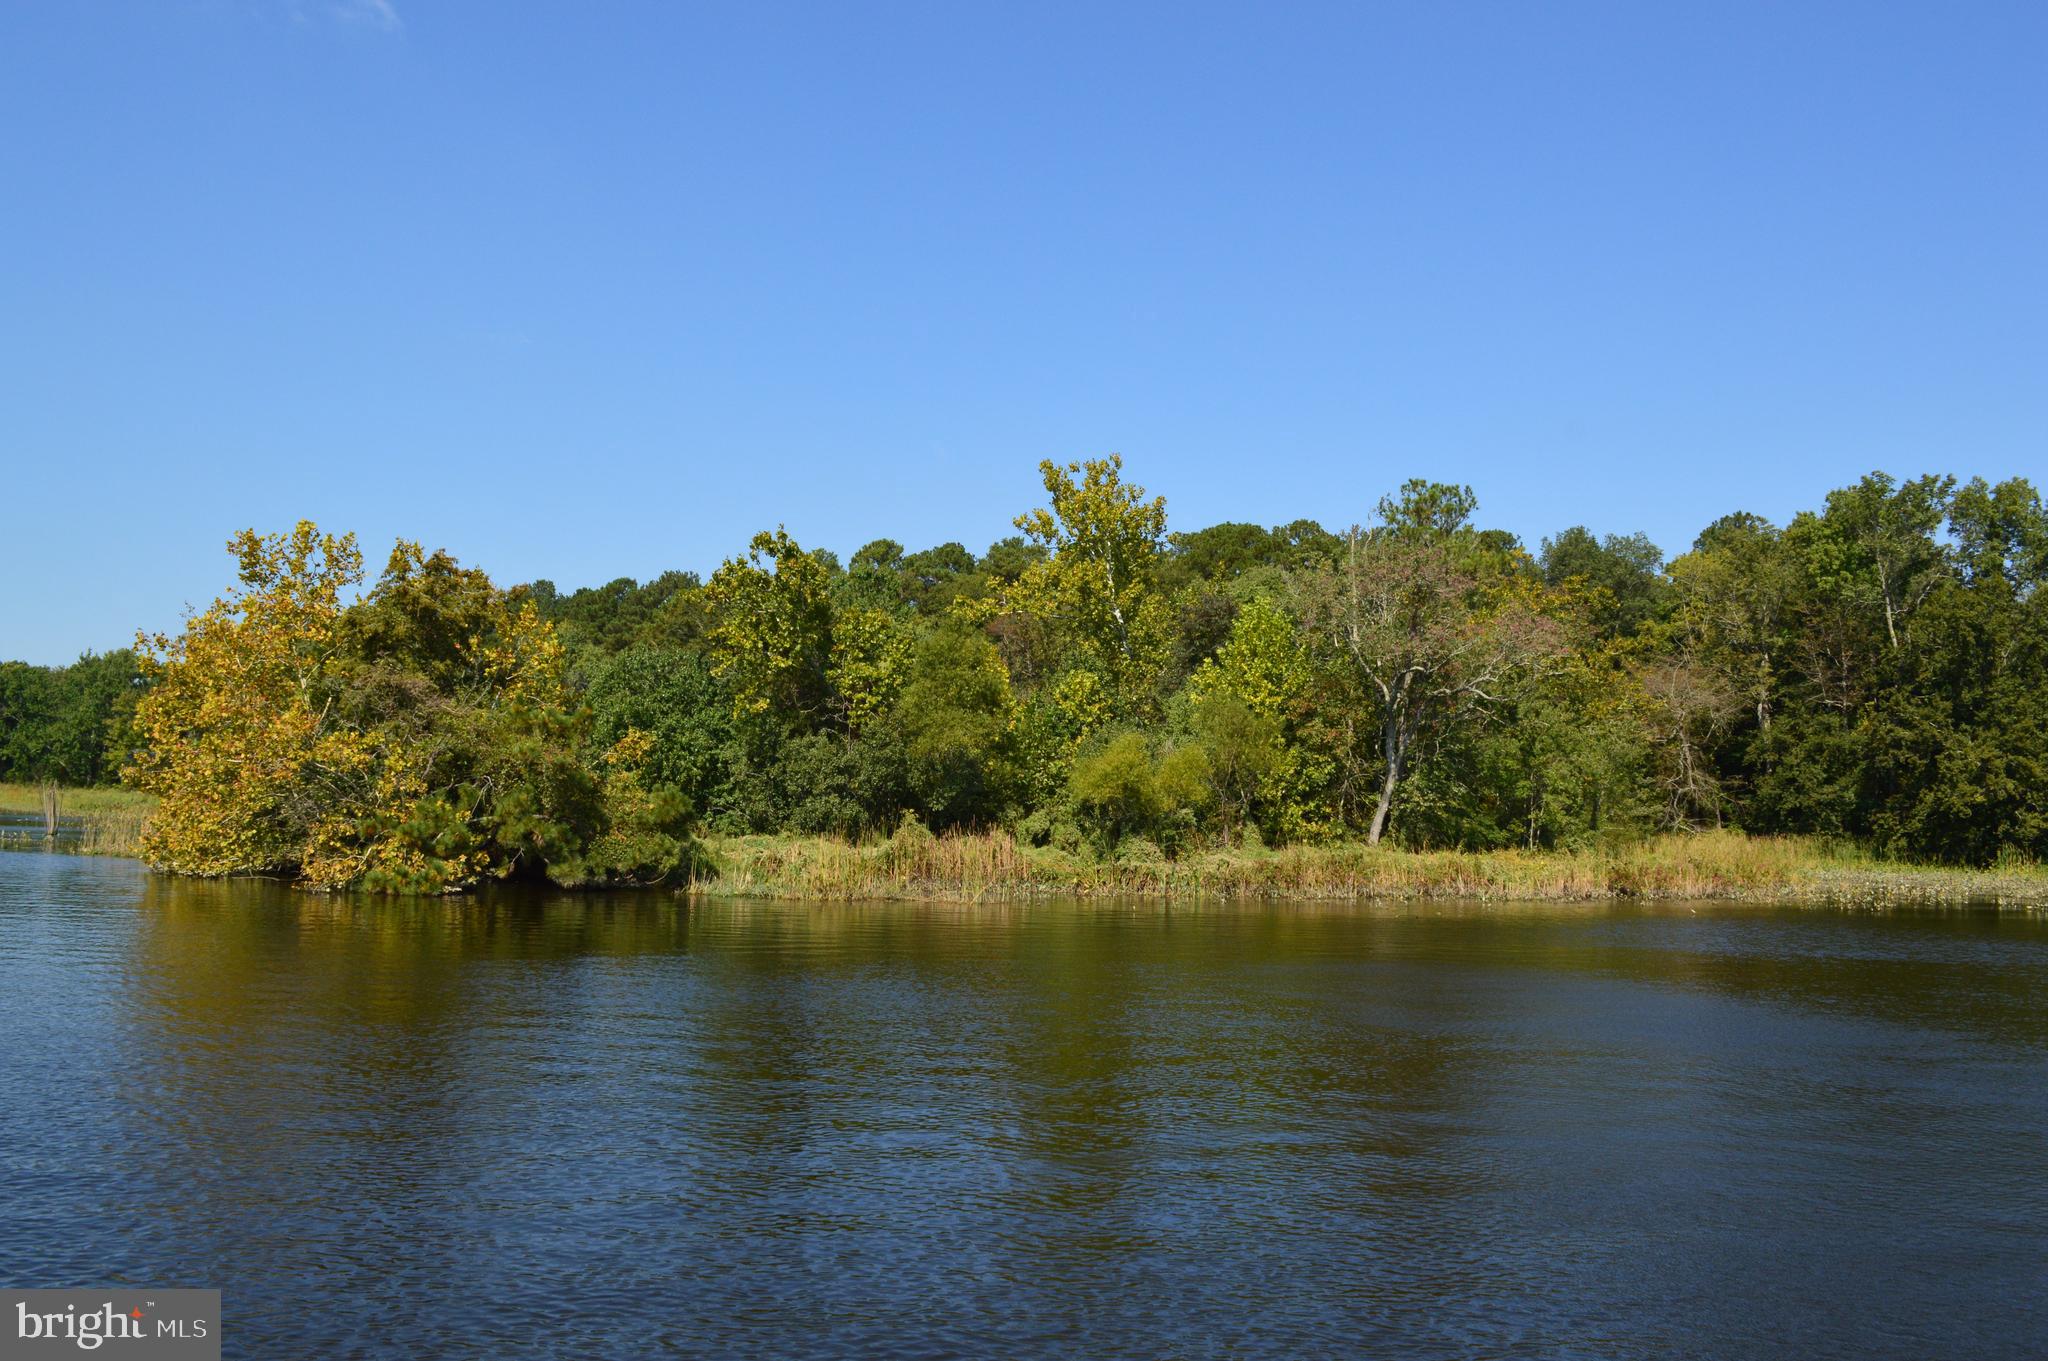 a view of lake and trees